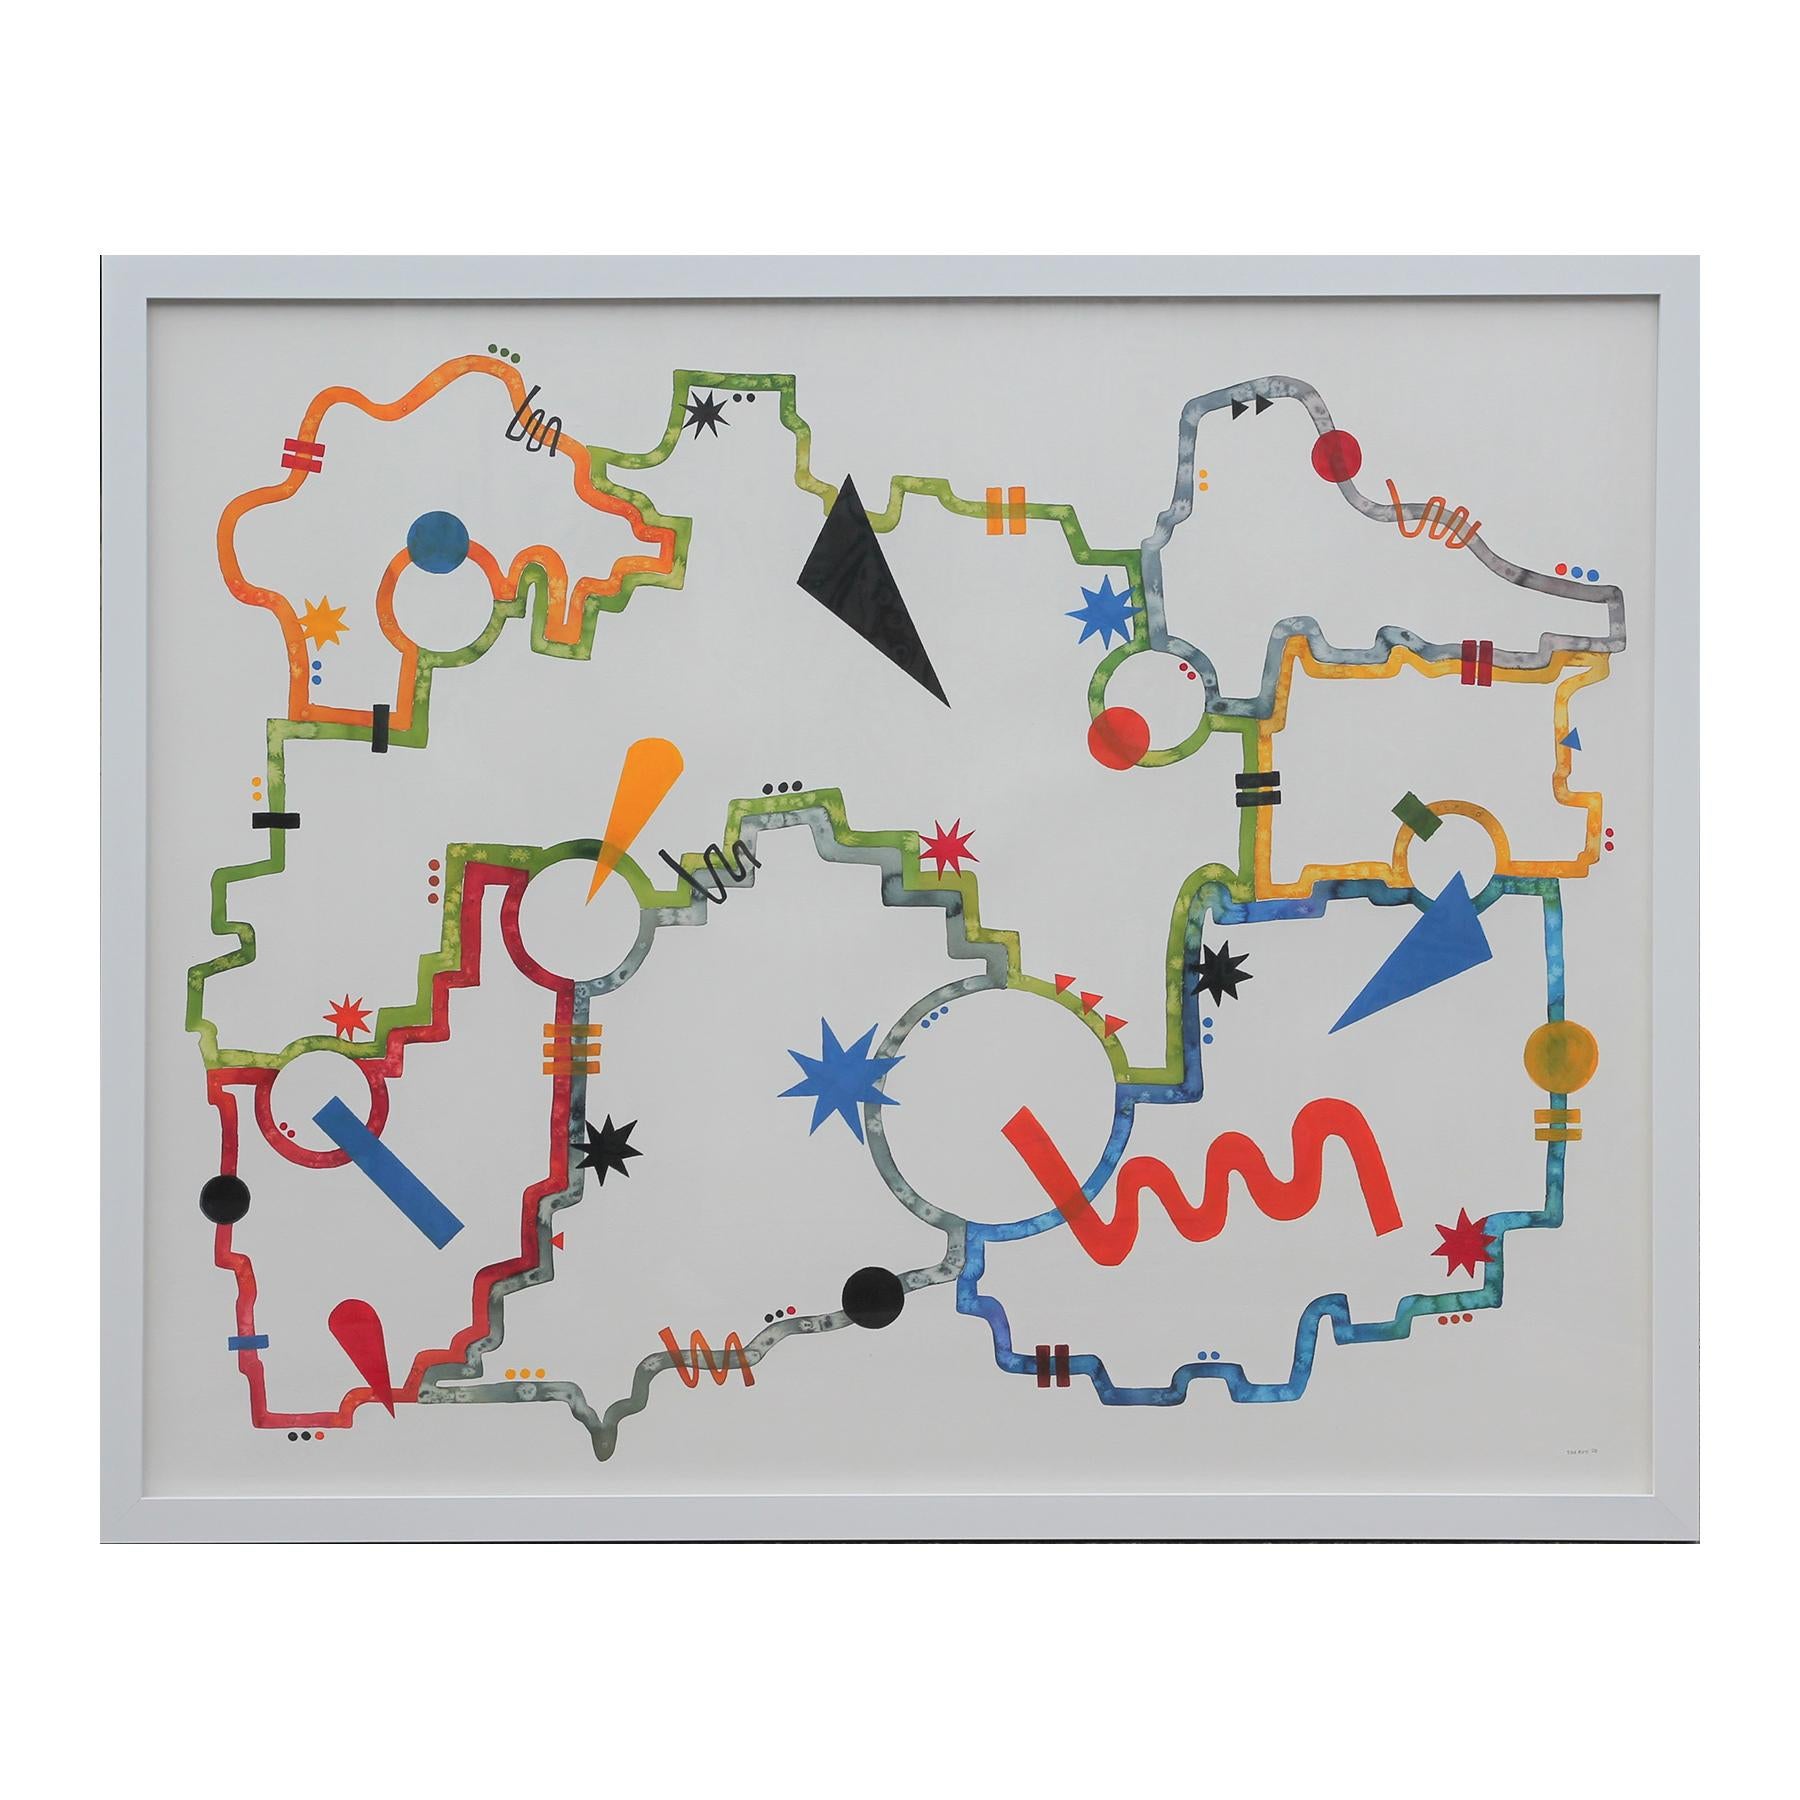 Tina Ruyi Abstract Drawing - “The Circuit” Abstract Geometric Green, Blue, Yellow and Red Painting